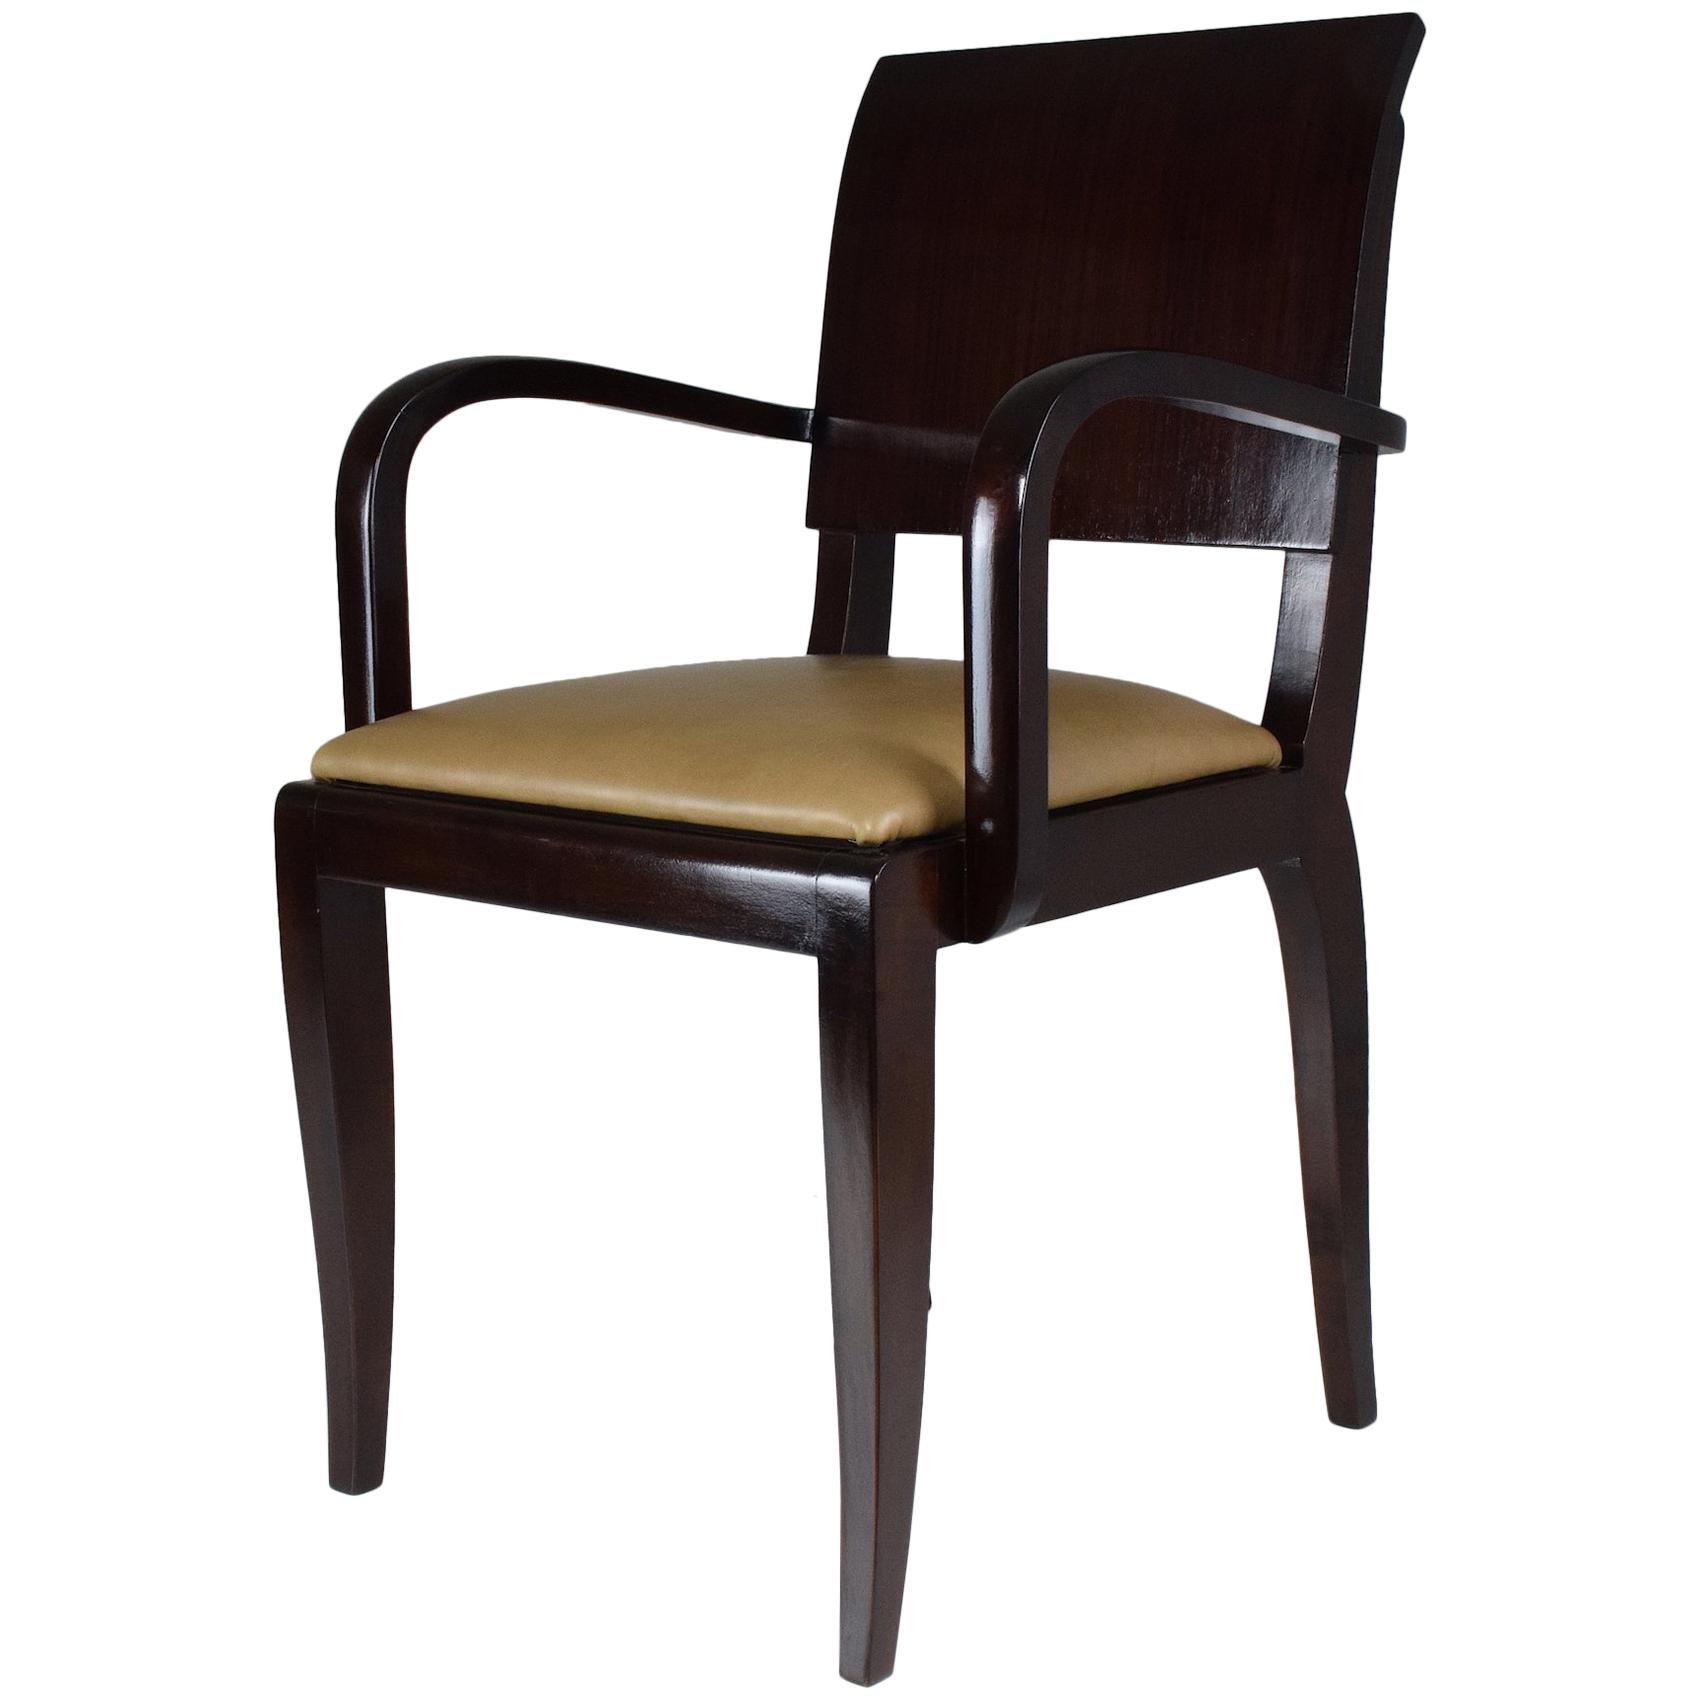 French Vintage Art Deco Mahogany Chair, 1940s